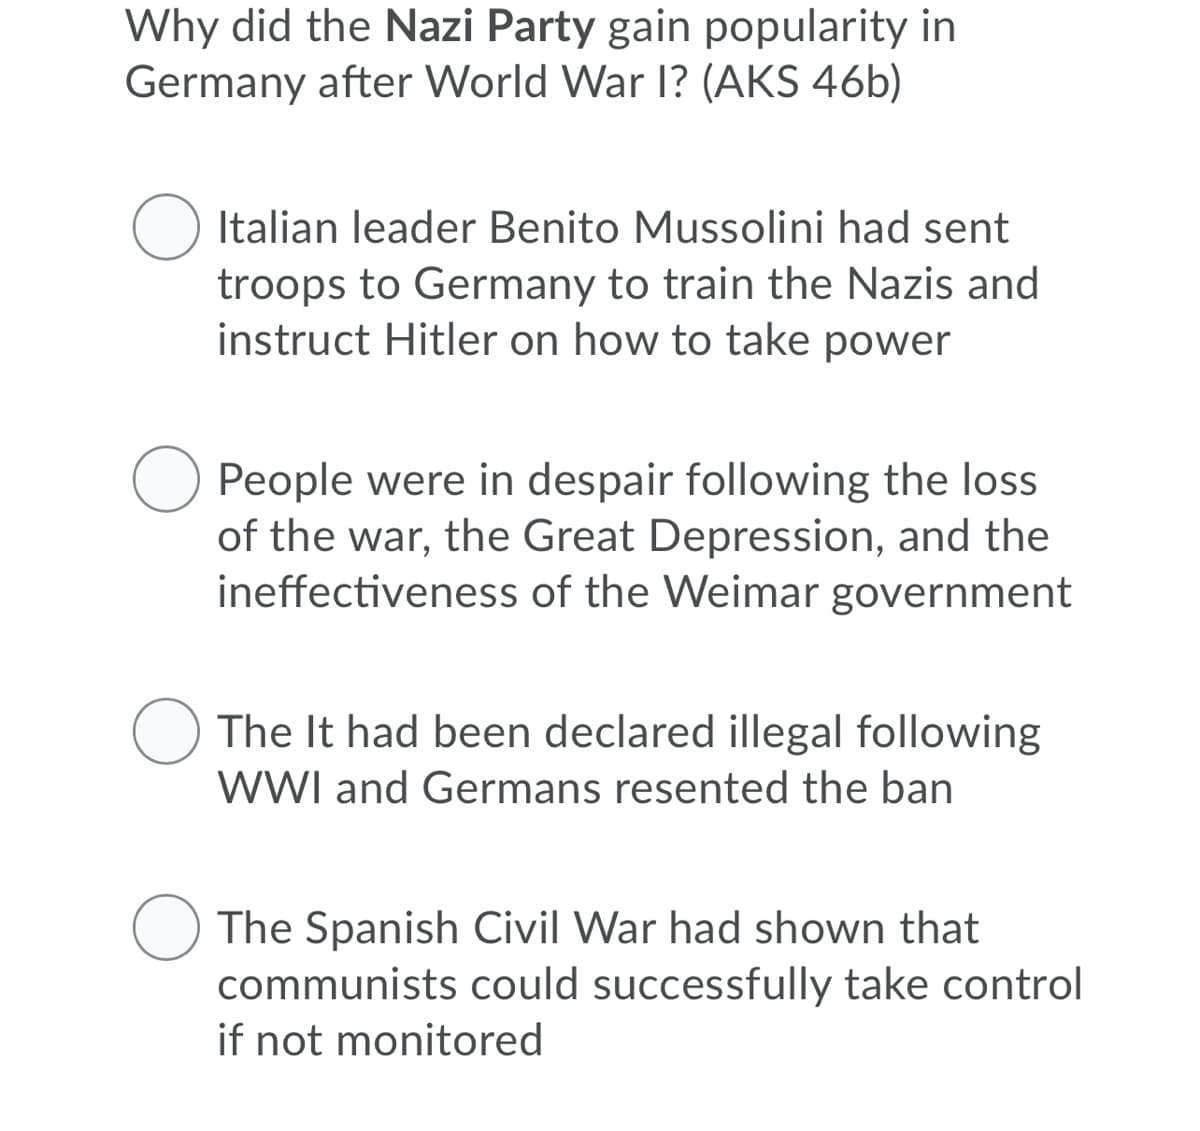 Why did the Nazi Party gain popularity in
Germany after World War I? (AKS 46b)
Italian leader Benito Mussolini had sent
troops to Germany to train the Nazis and
instruct Hitler on how to take power
People were in despair following the loss
of the war, the Great Depression, and the
ineffectiveness of the Weimar government
The It had been declared illegal following
WWI and Germans resented the ban
The Spanish Civil War had shown that
communists could successfully take control
if not monitored
